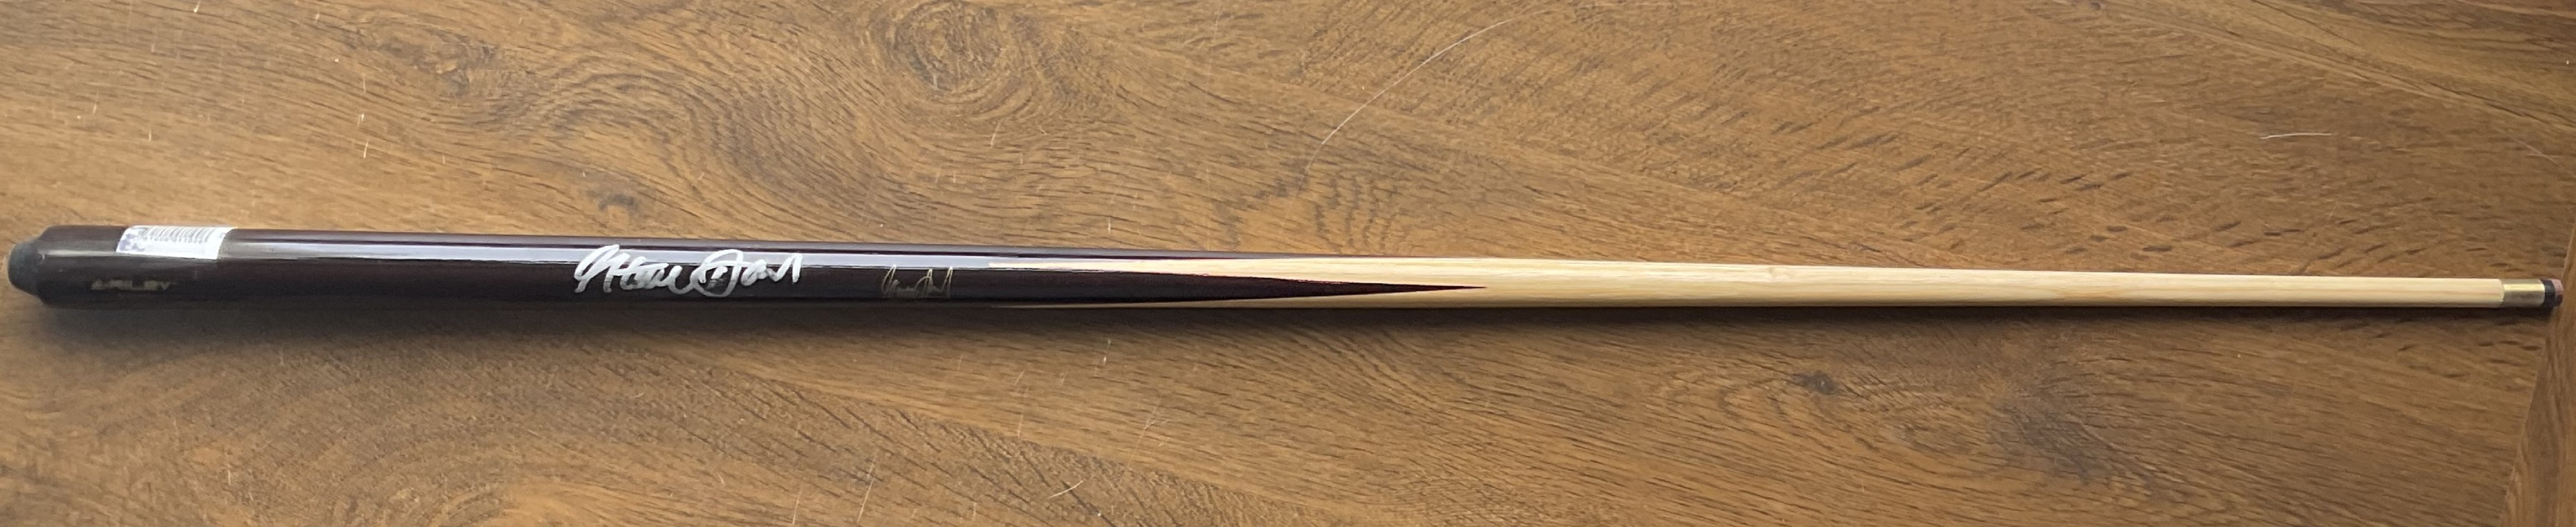 Steve Davis signed Riley small one-piece snooker cue.